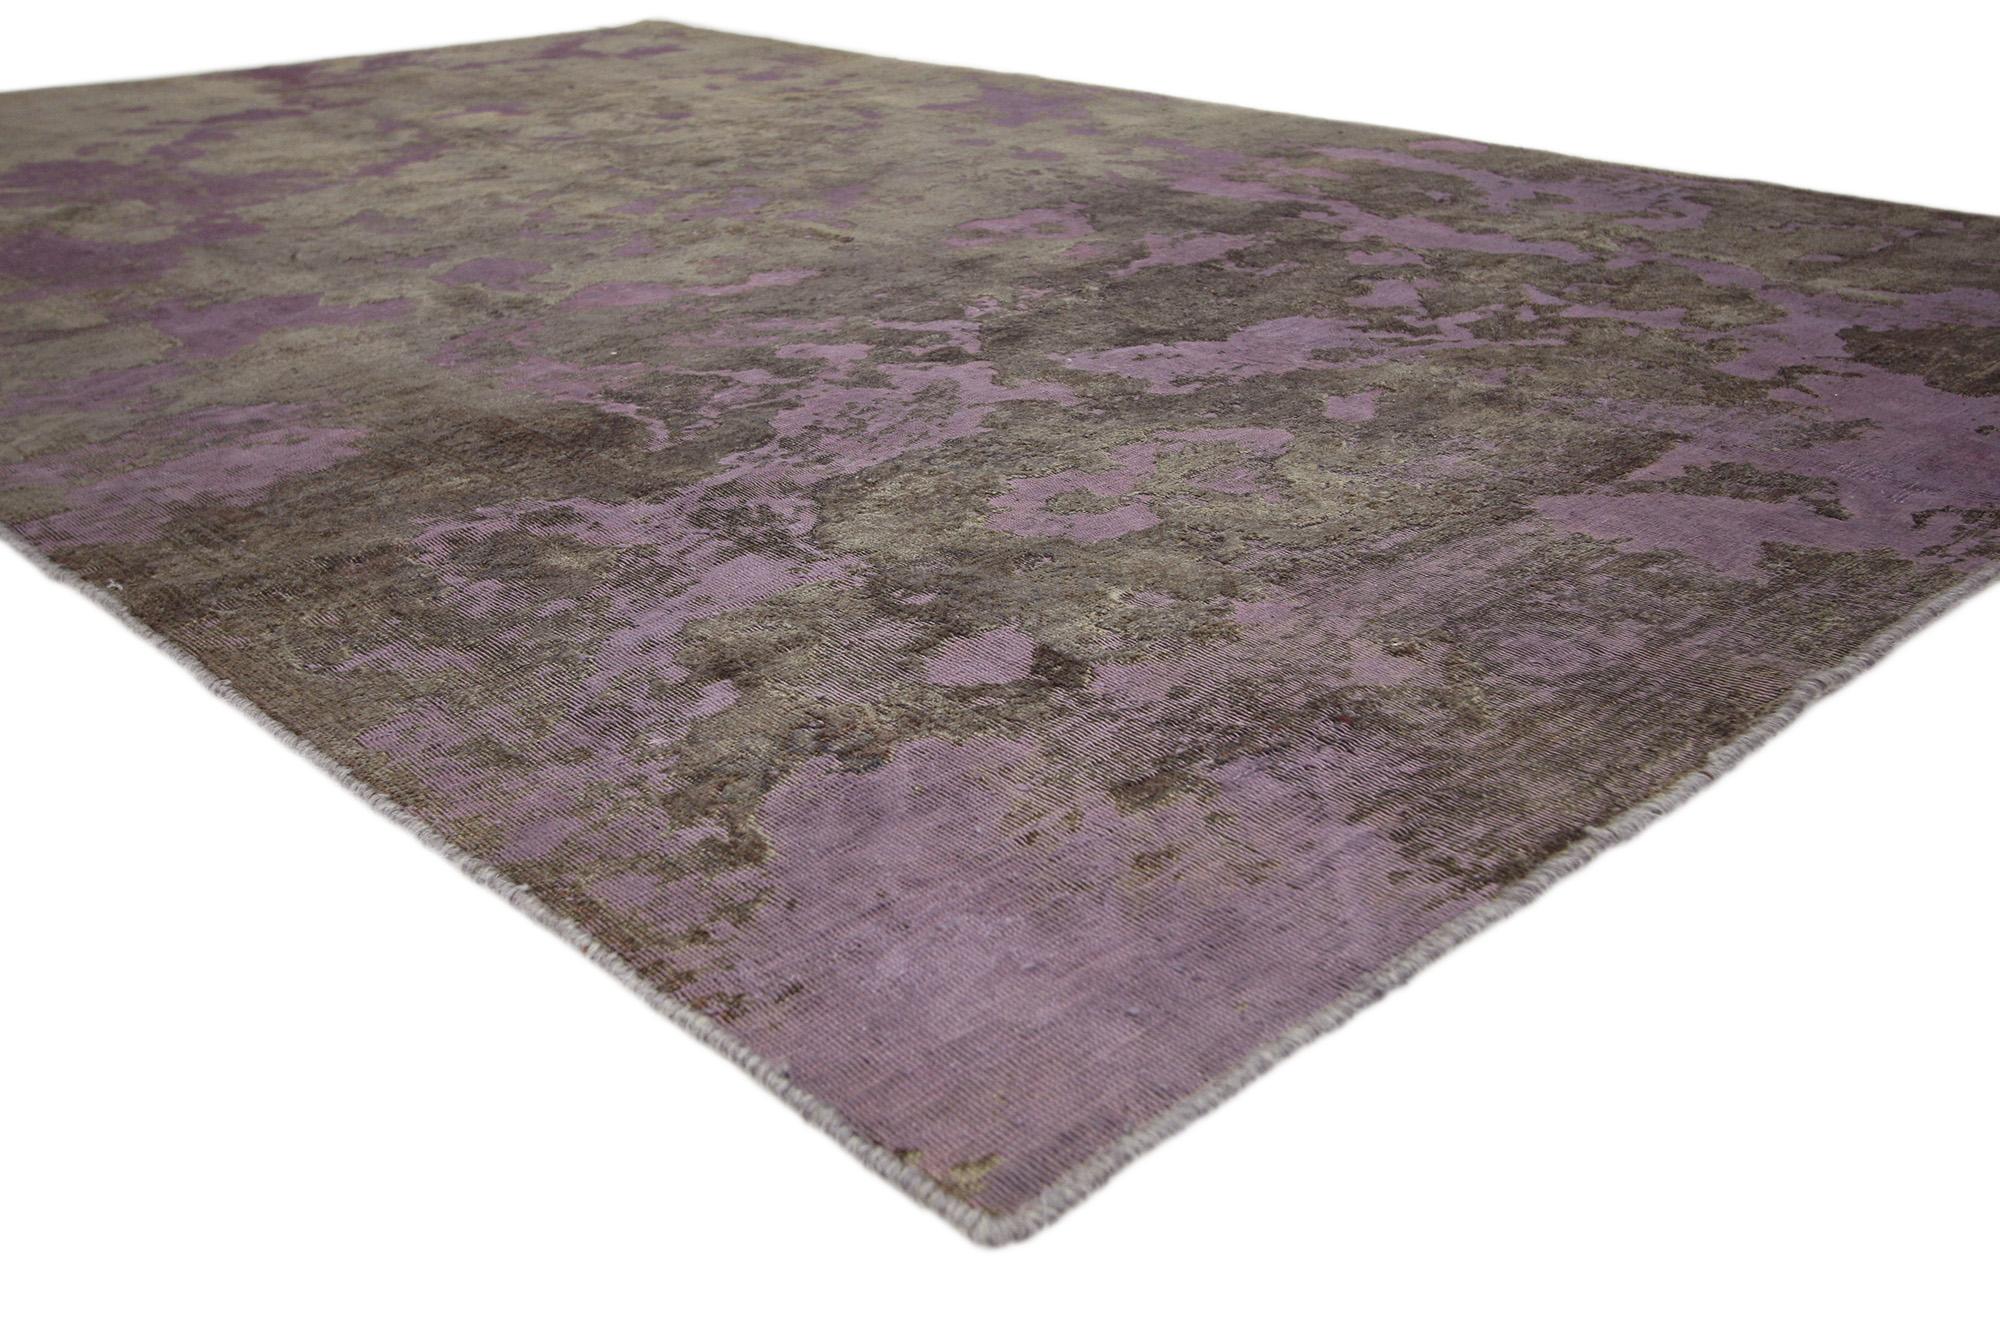 60627 Vintage Turkish Overdyed Rug, 06'03 x 09'09.
Get ready to be waltzed off your feet as Industrial Chic shows off its smooth moves with the softer side of Abstract Expressionism in this hand-knotted wool vintage Turkish overdyed rug. It's not